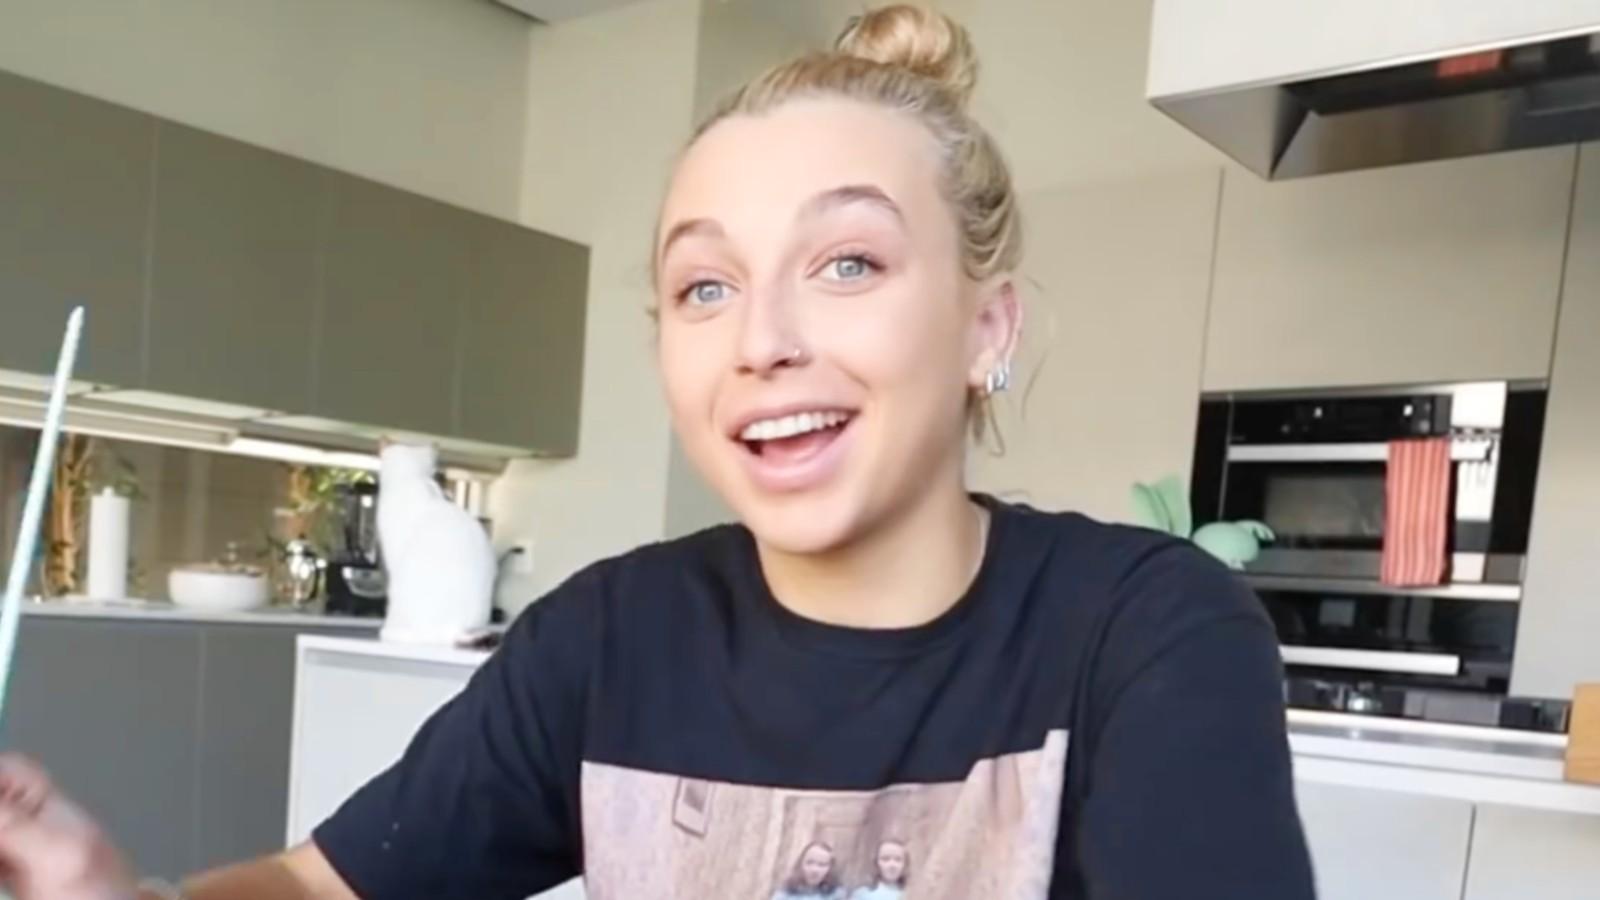 Emma Chamberlain smiles, looking at the camera in a YouTuber video